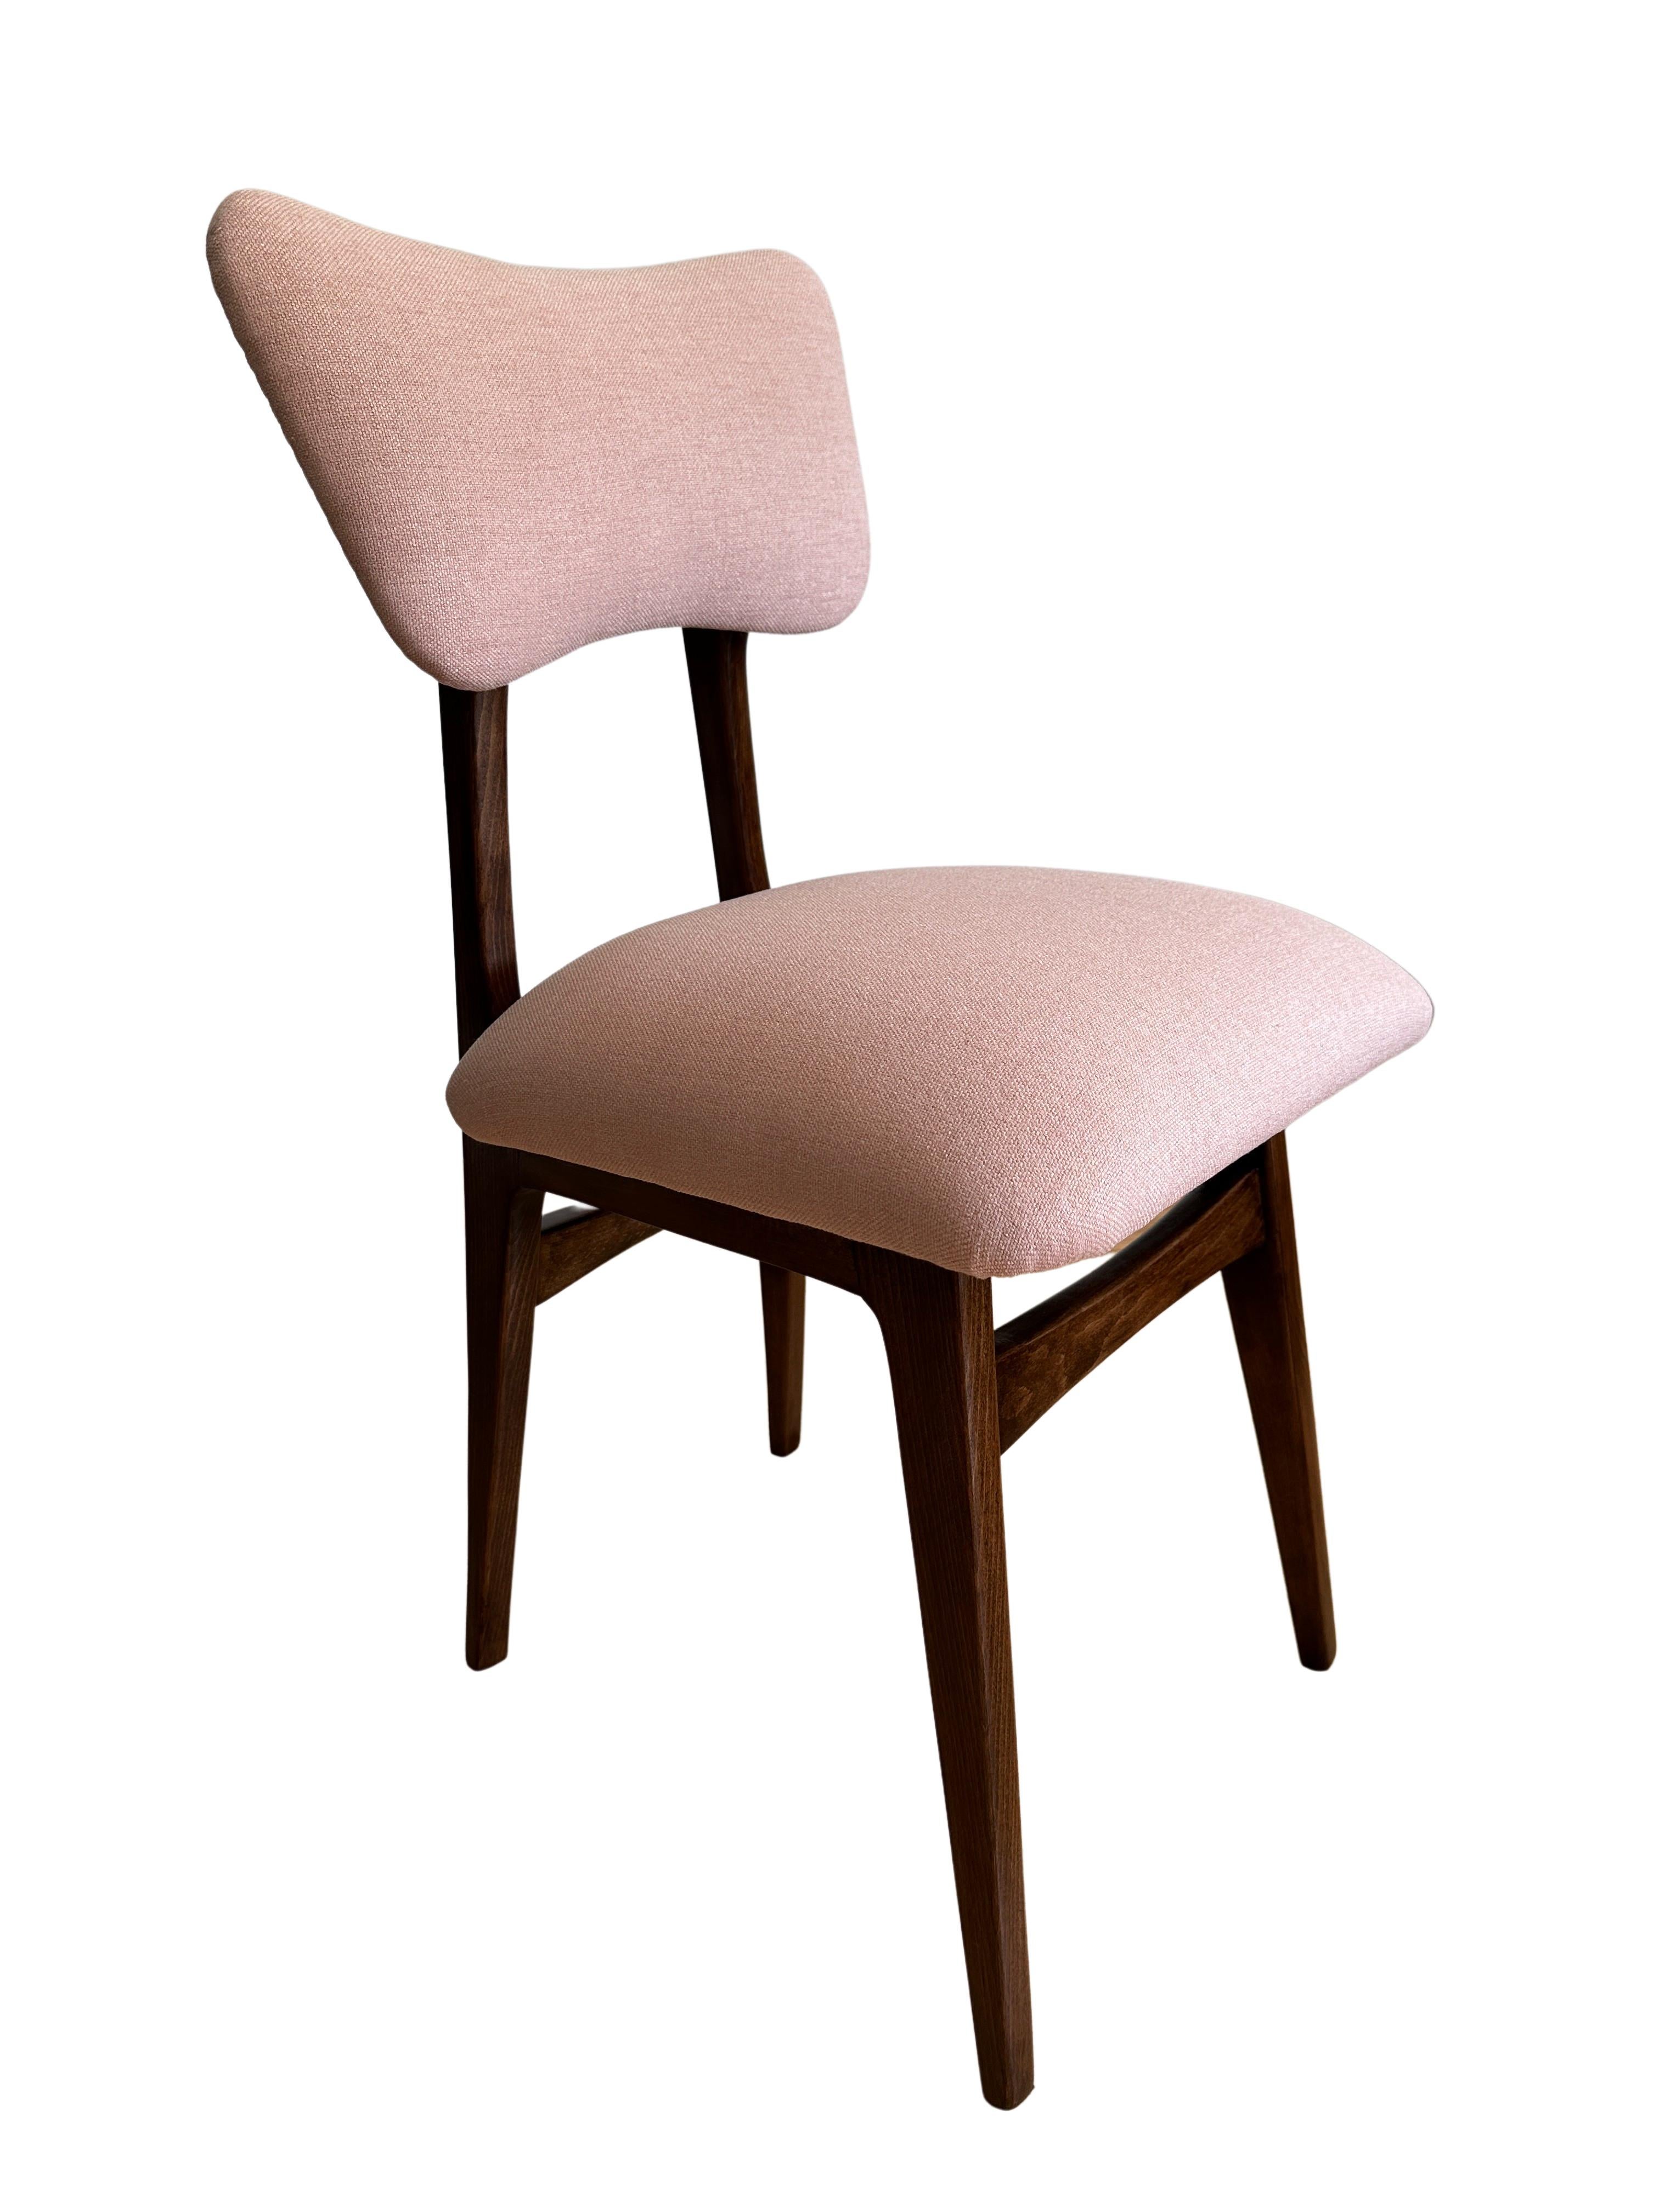 Bouclé Midcentury Wooden Dining Chair in Light Pink Upholstery, Europe, 1960s For Sale